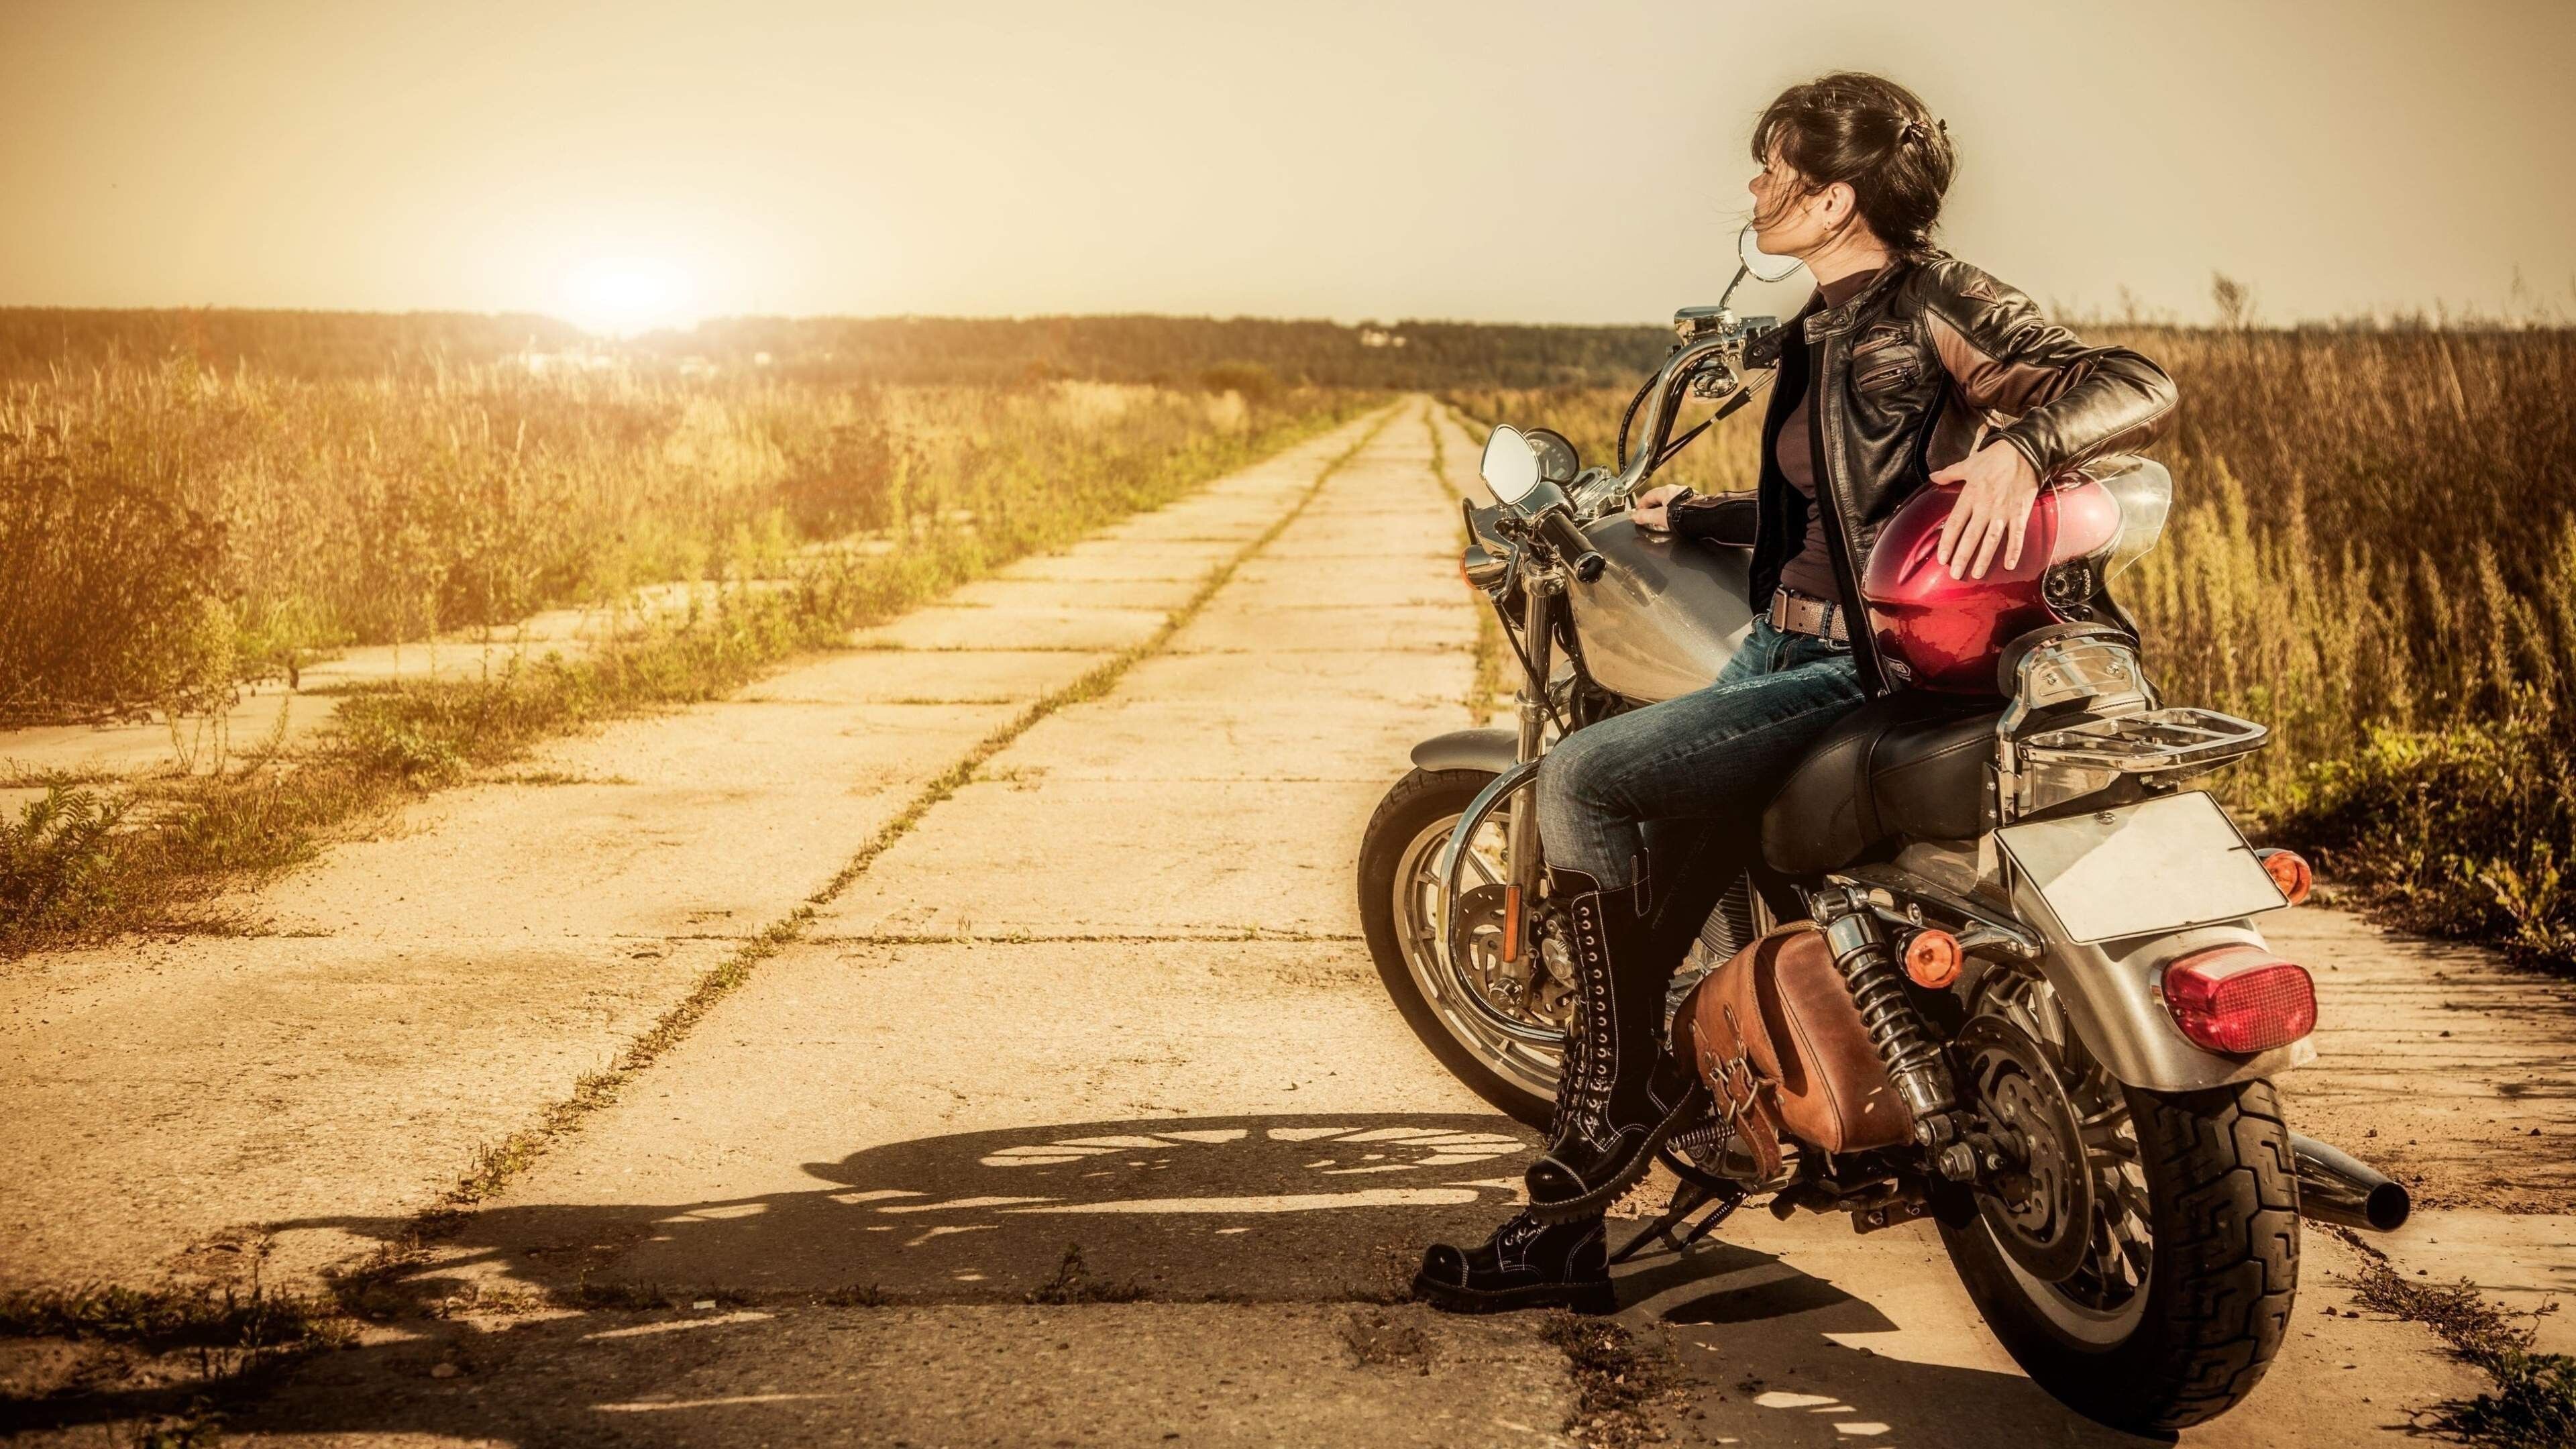 Girls and Motorcycles: Solo motorcycle touring, Biker clothing: Leather jacket, jeans, boots, Side bag. 3840x2160 4K Wallpaper.